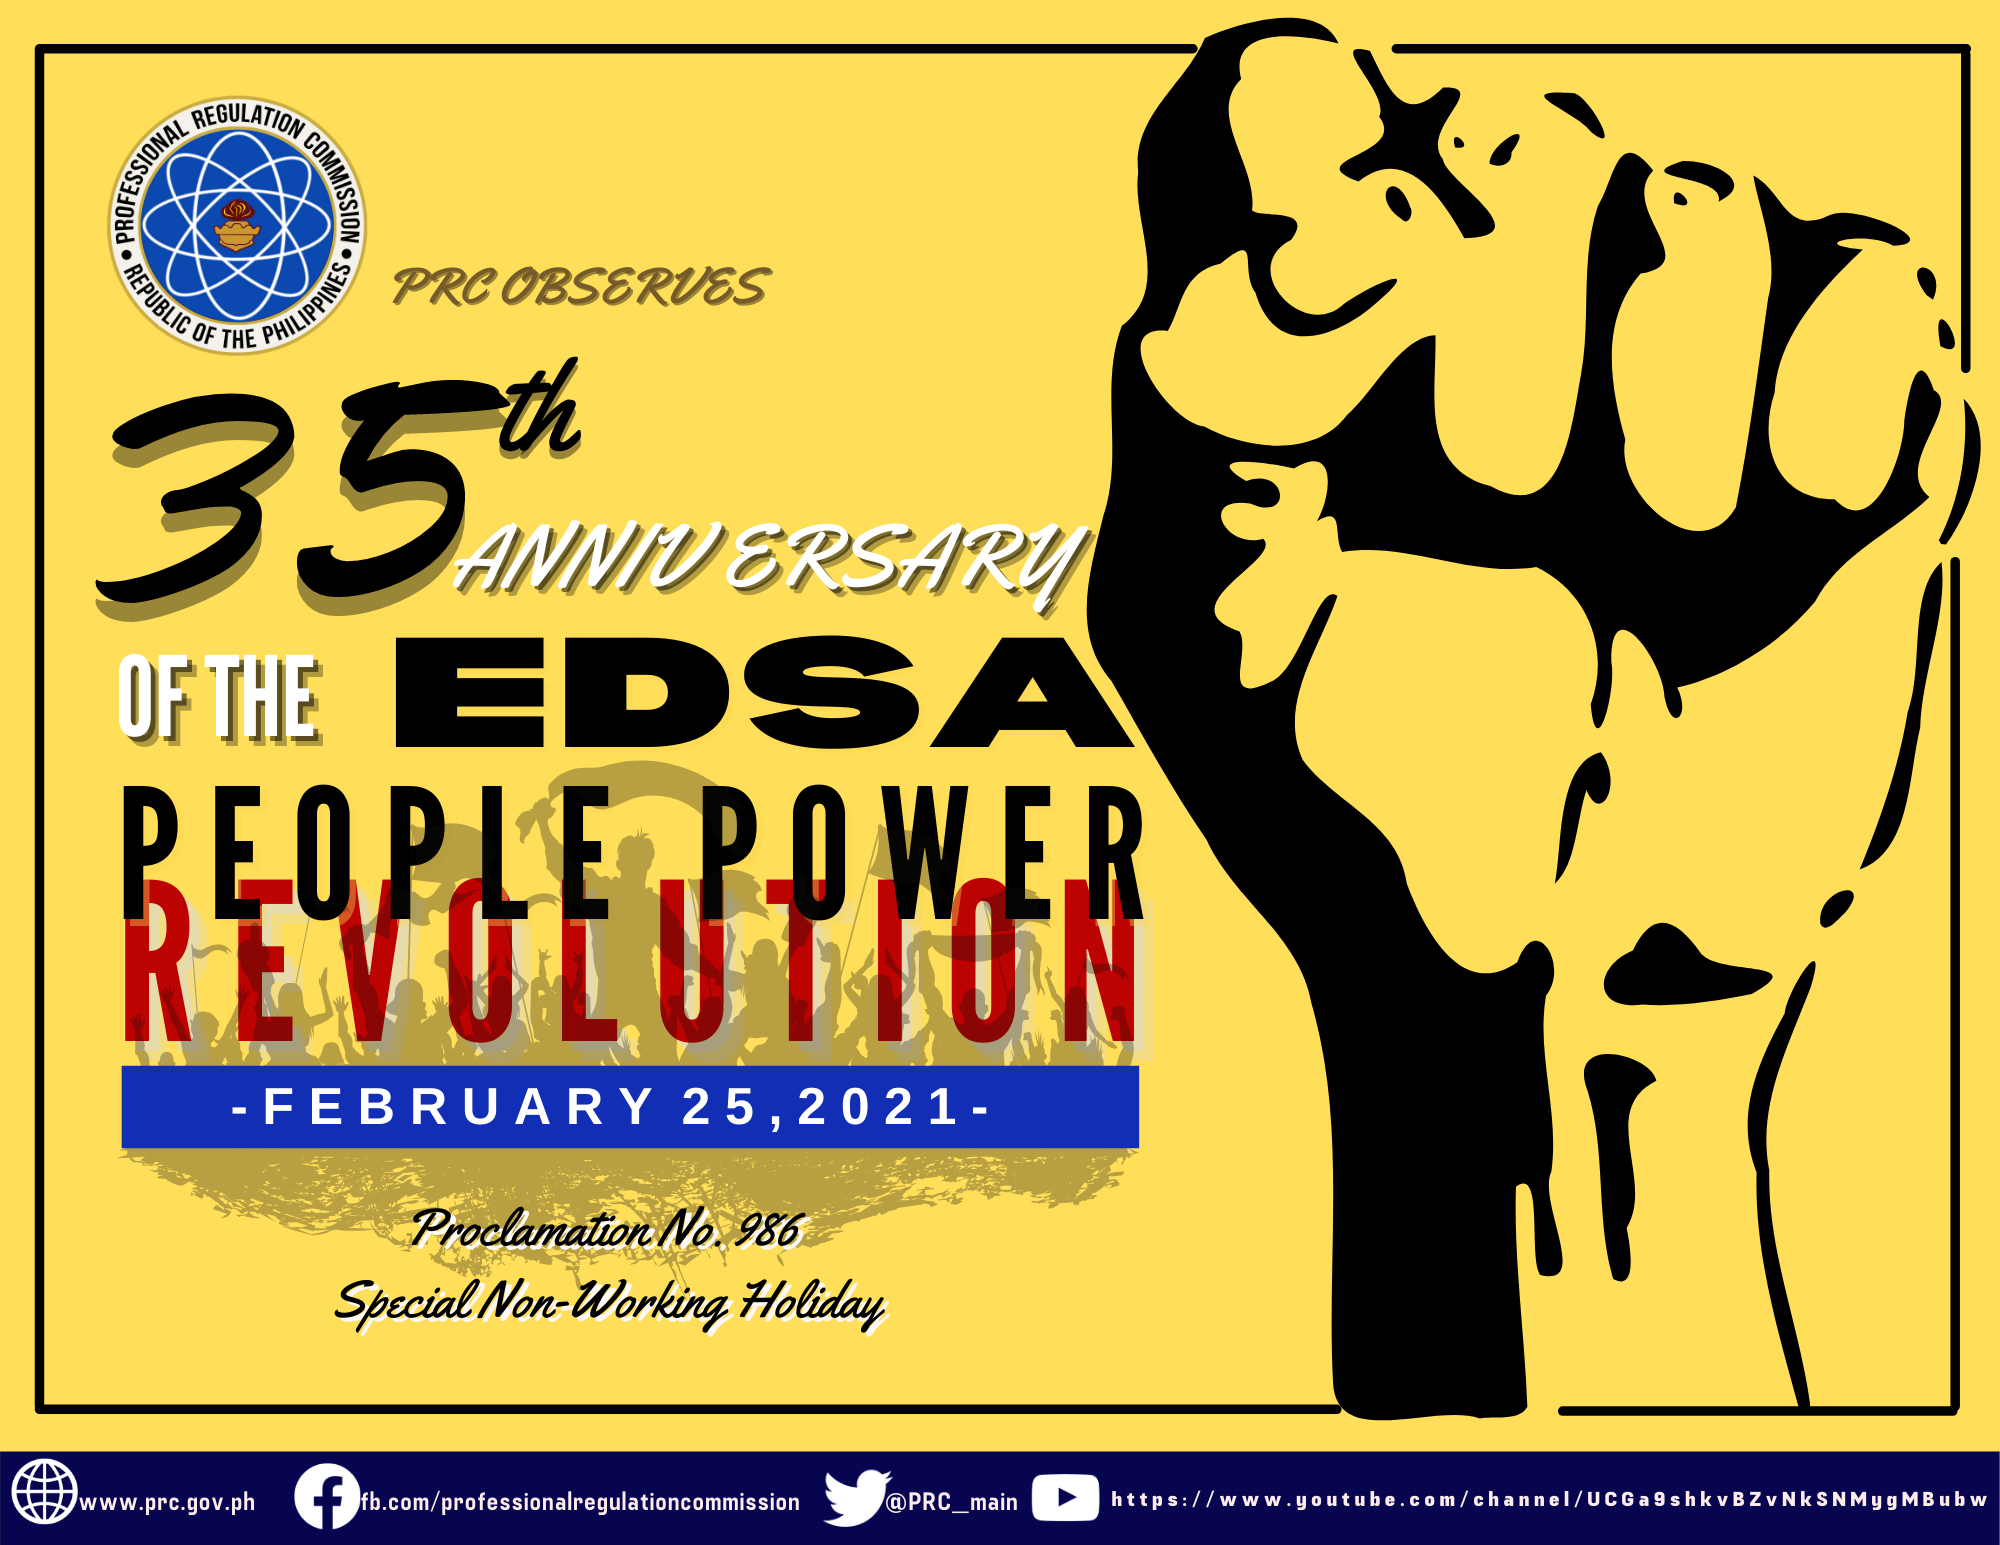 PRC Observes 35th Anniversary of The EDSA People Power Revolution